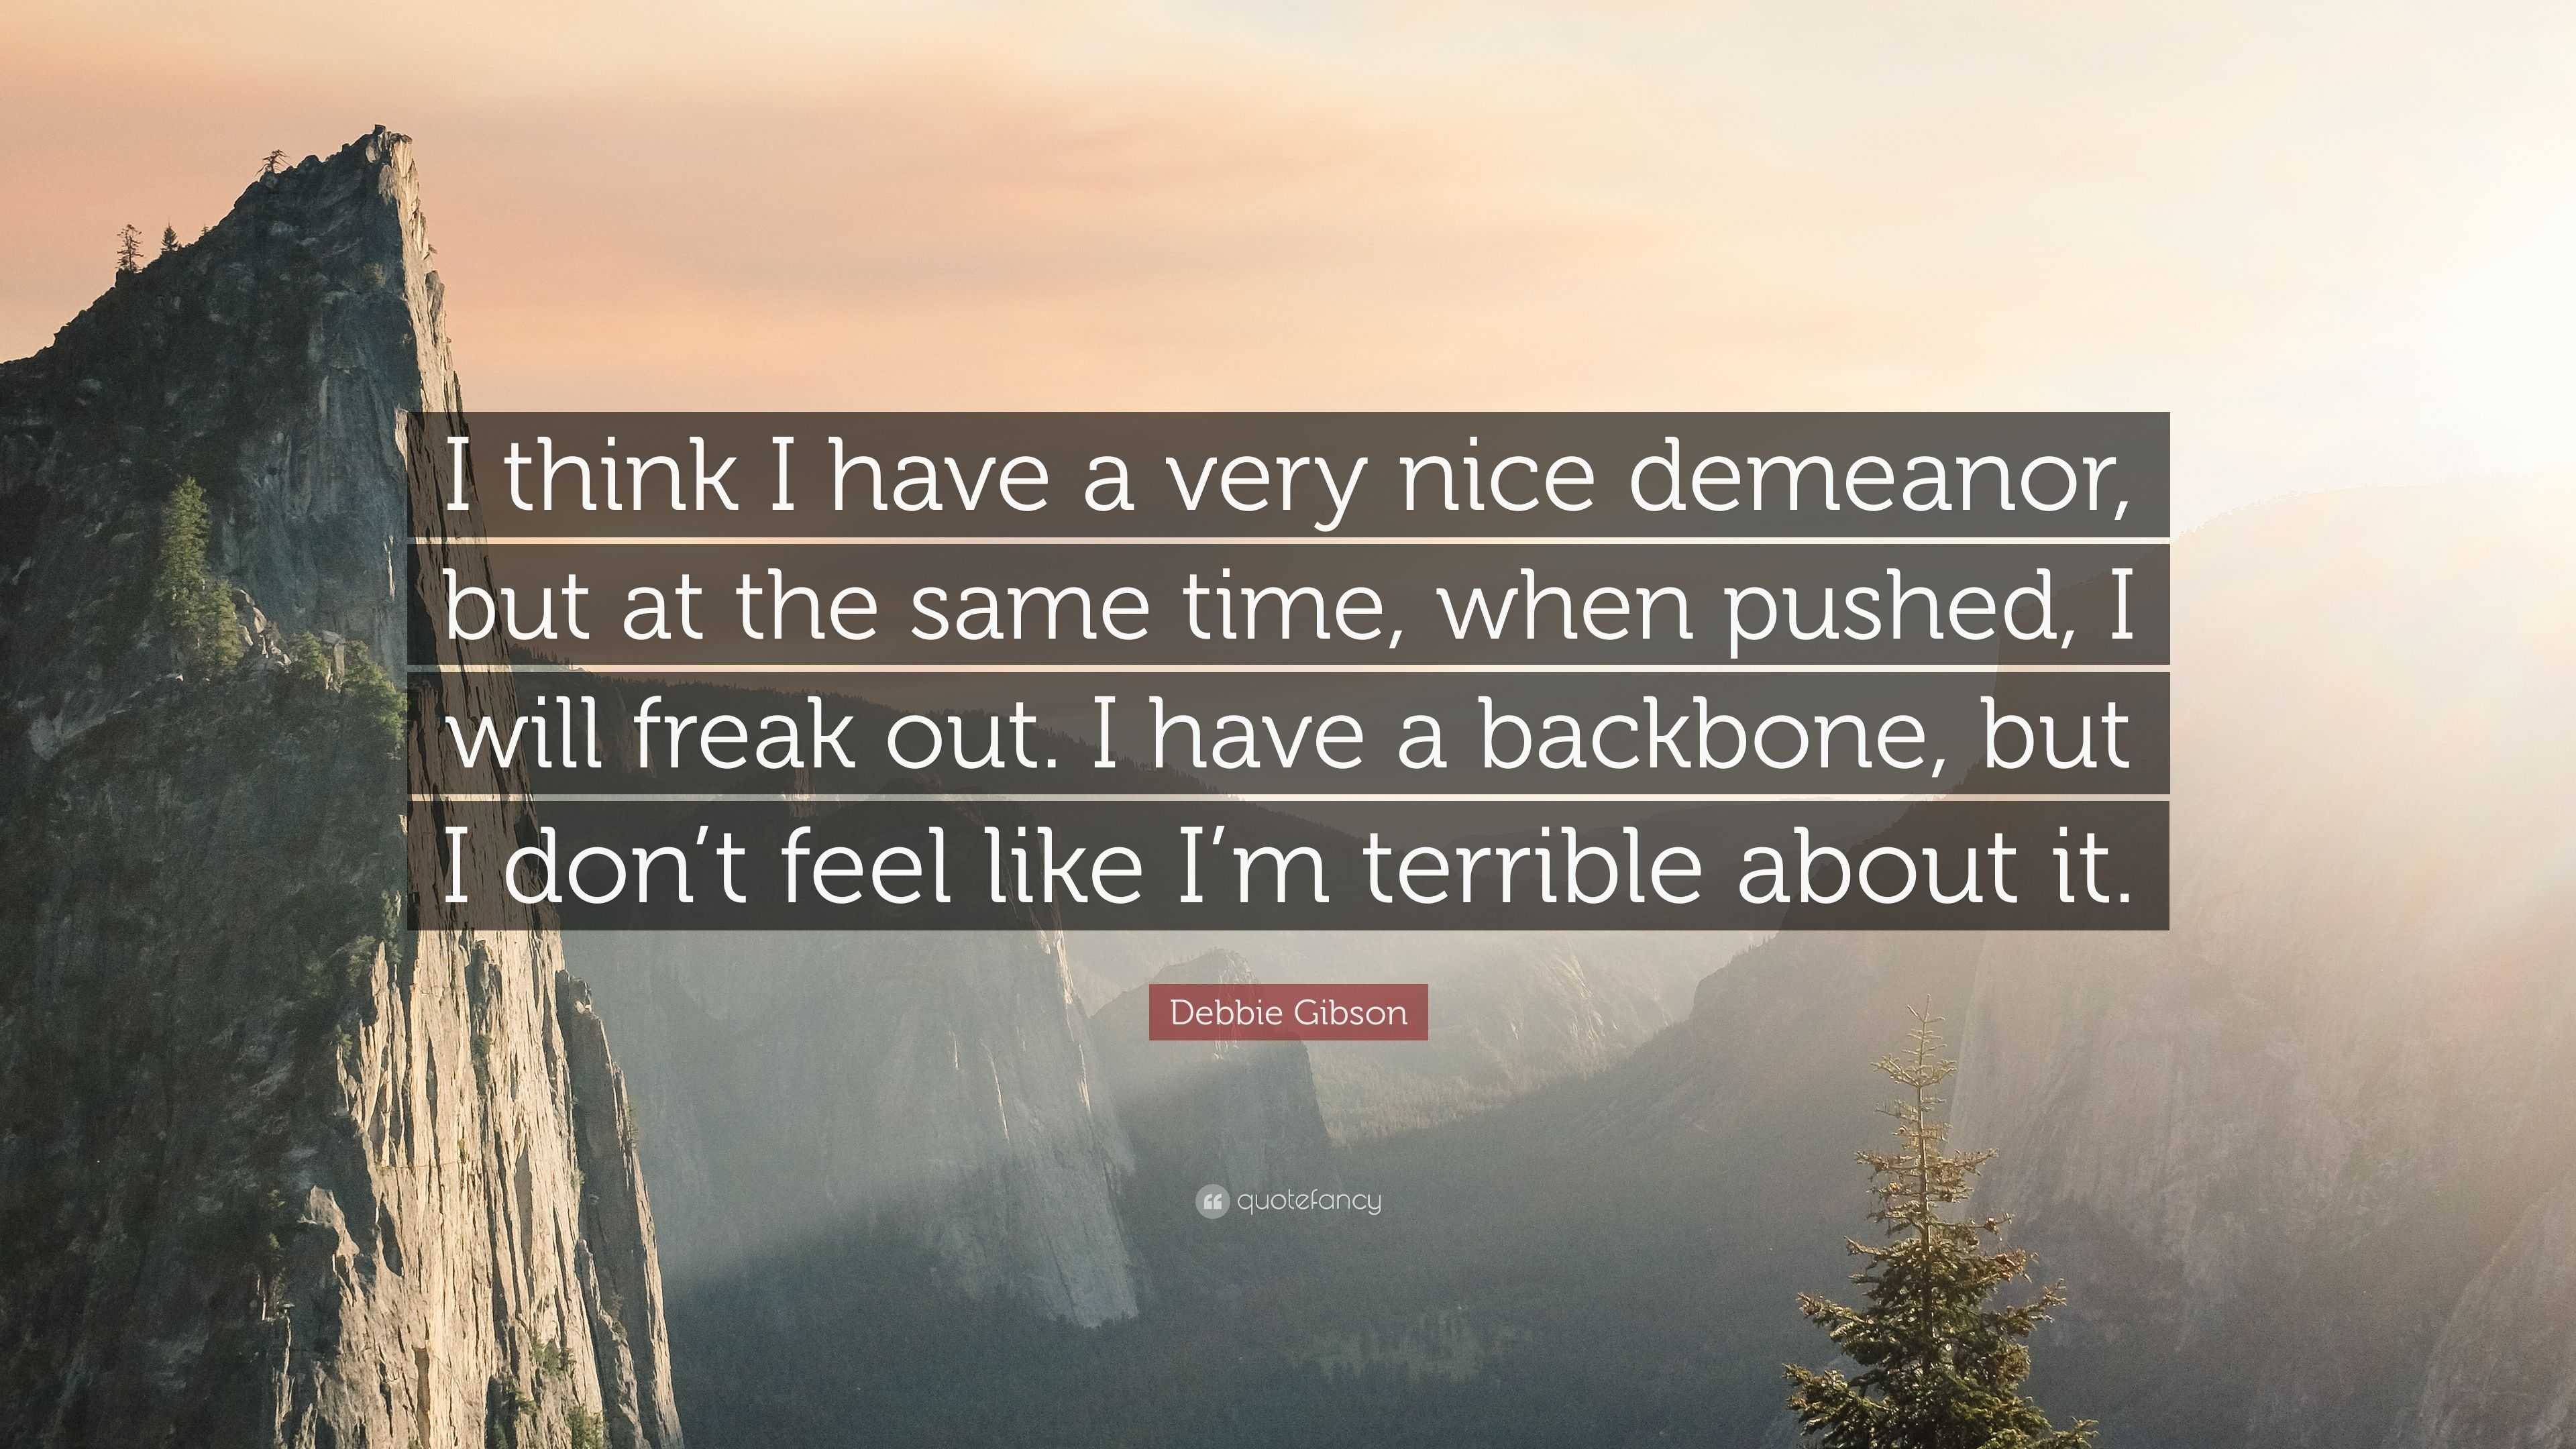 Debbie Gibson Quote I think I have a very nice demeanor but at the same  time when pushed I will freak out I have a backbone but I dont